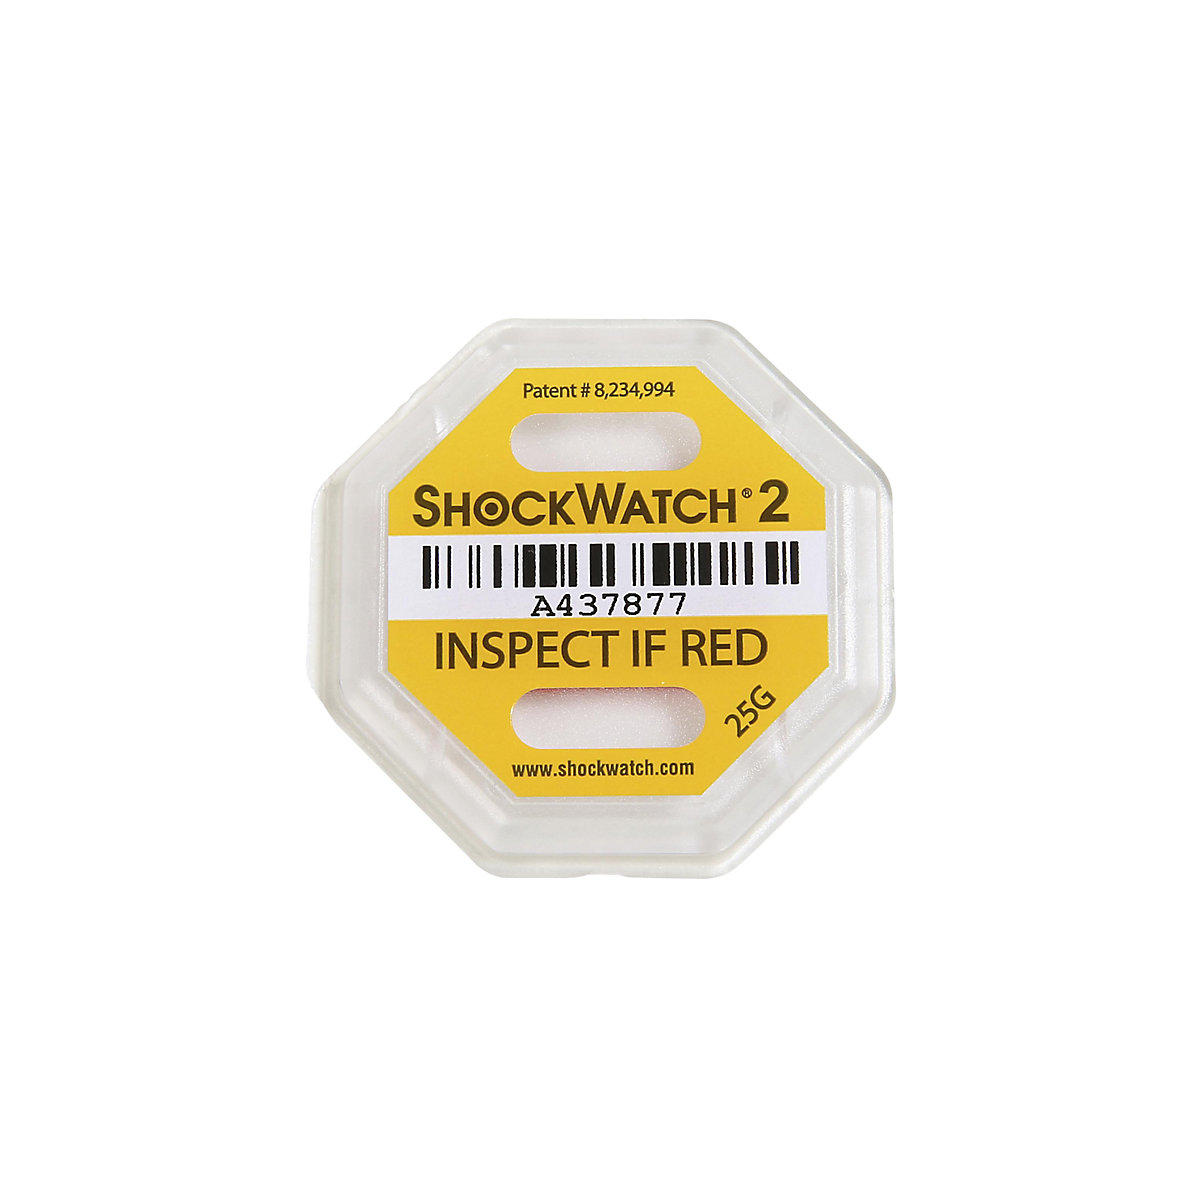 Shockwatch® 2 impact indicators, incl. label, pack of 100, yellow-1